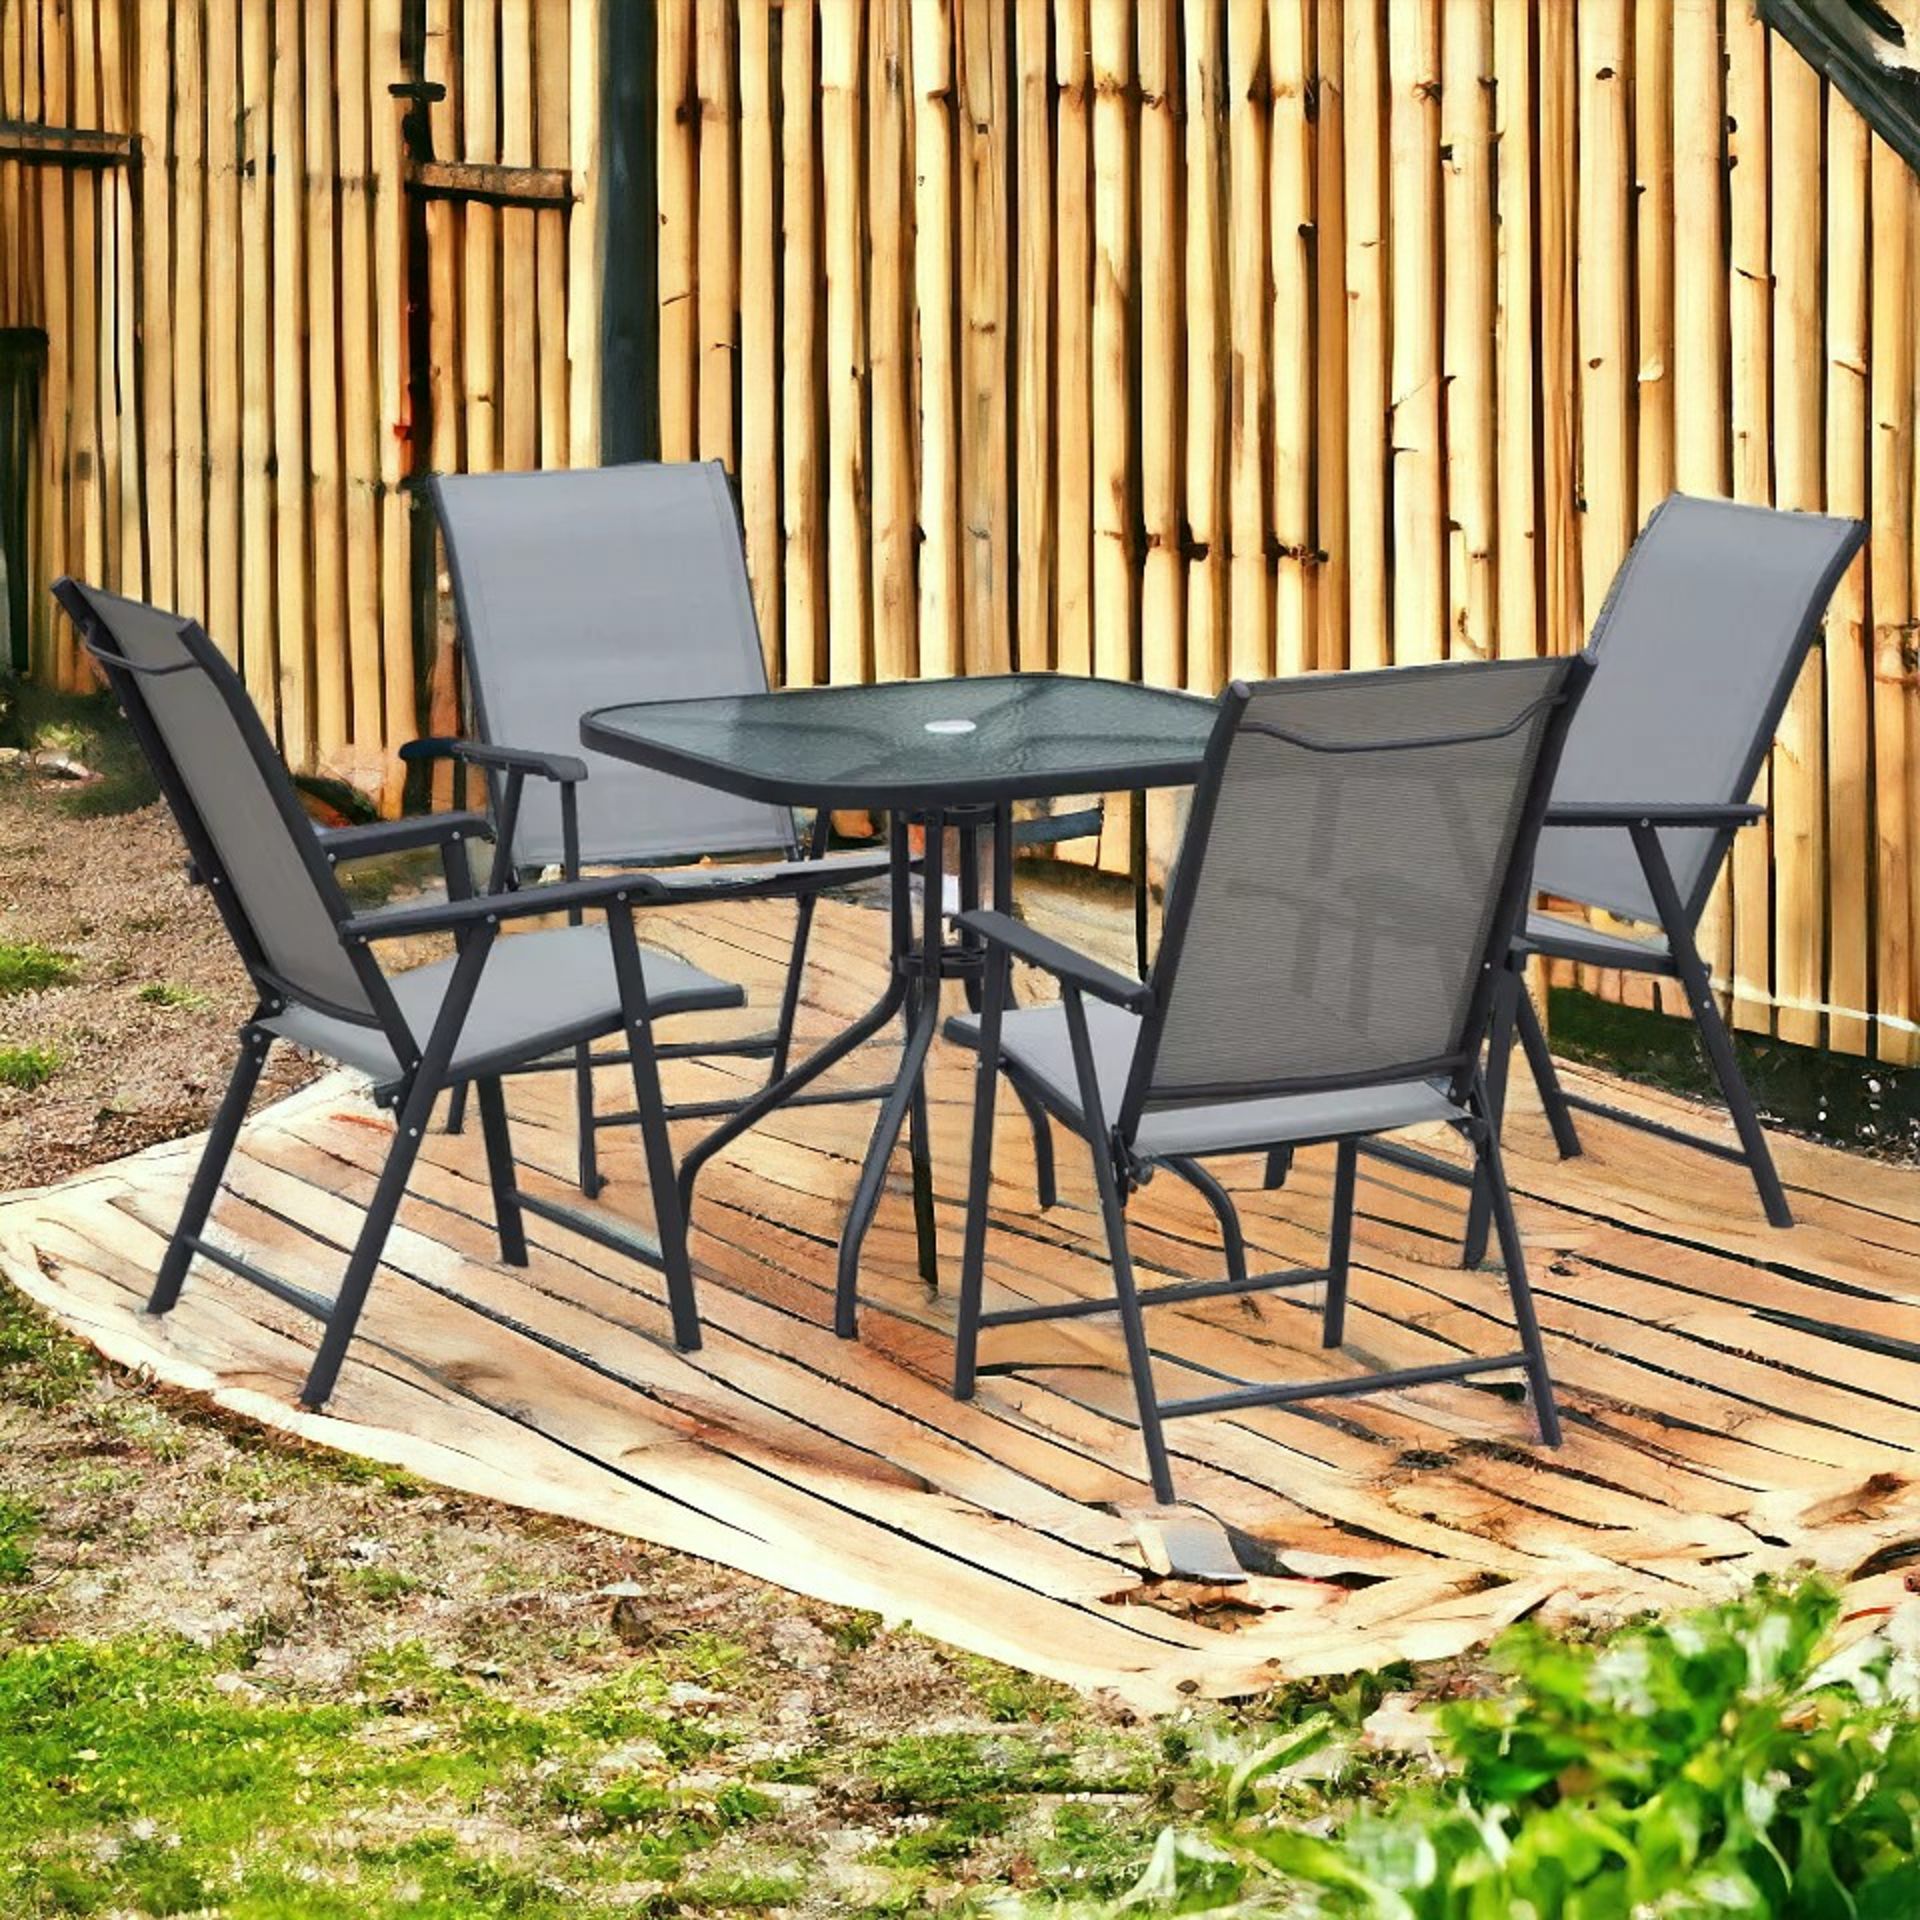 FREE DELIVERY -BRAND NEW 5PCS CLASSIC OUTDOOR DINING SET STEEL FRAMES W/ 4 CHAIRS COFFEE TABLE - Image 2 of 2